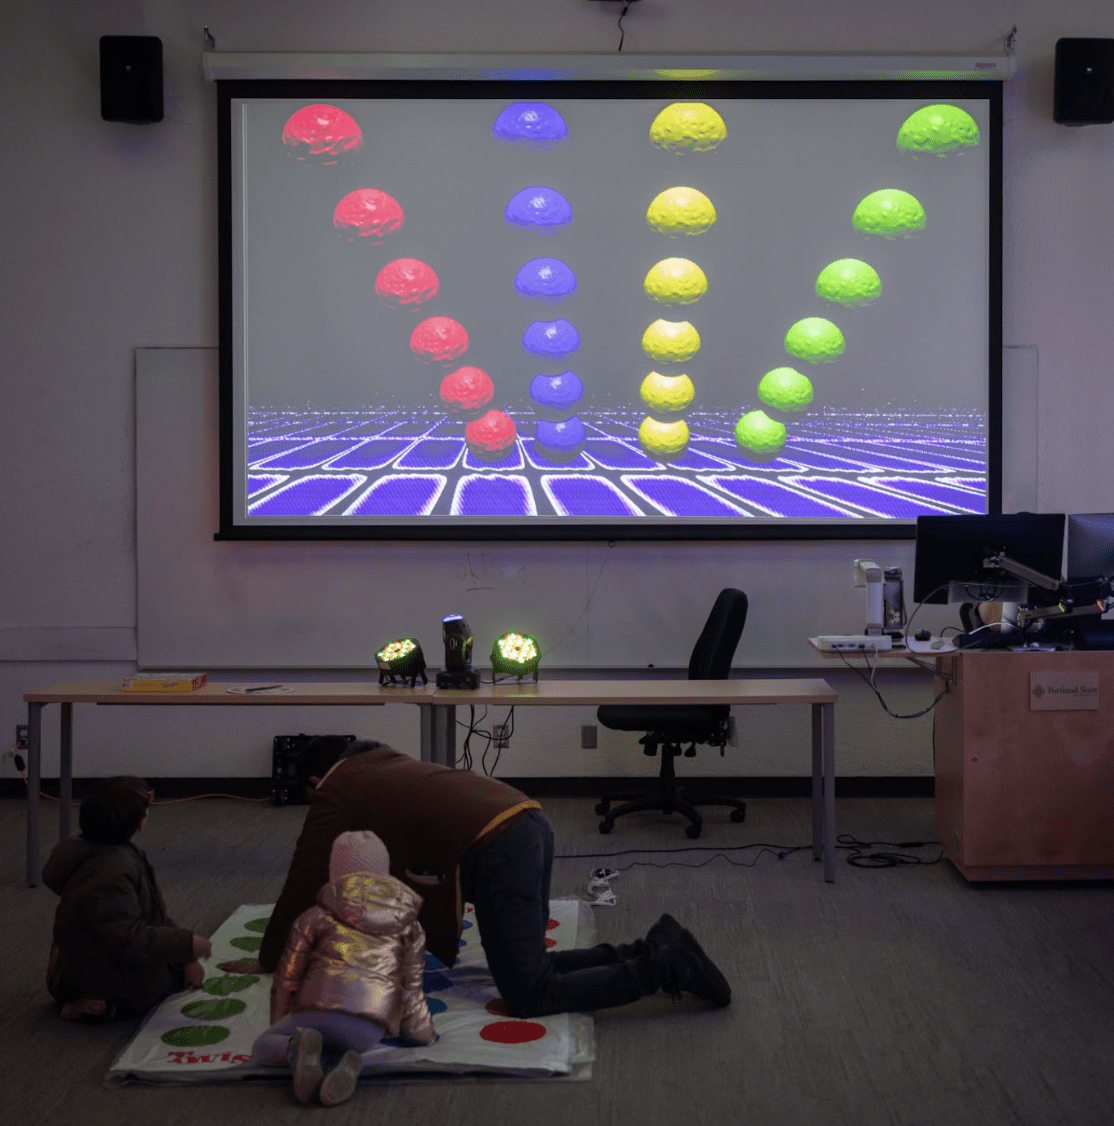 An abstract video featuring rows of circles is displayed onto a classroom projector screen. A twister game is set up on the ground in front of the video. Three people are interacting with the twister game. (Each of the twister circles triggered sounds).